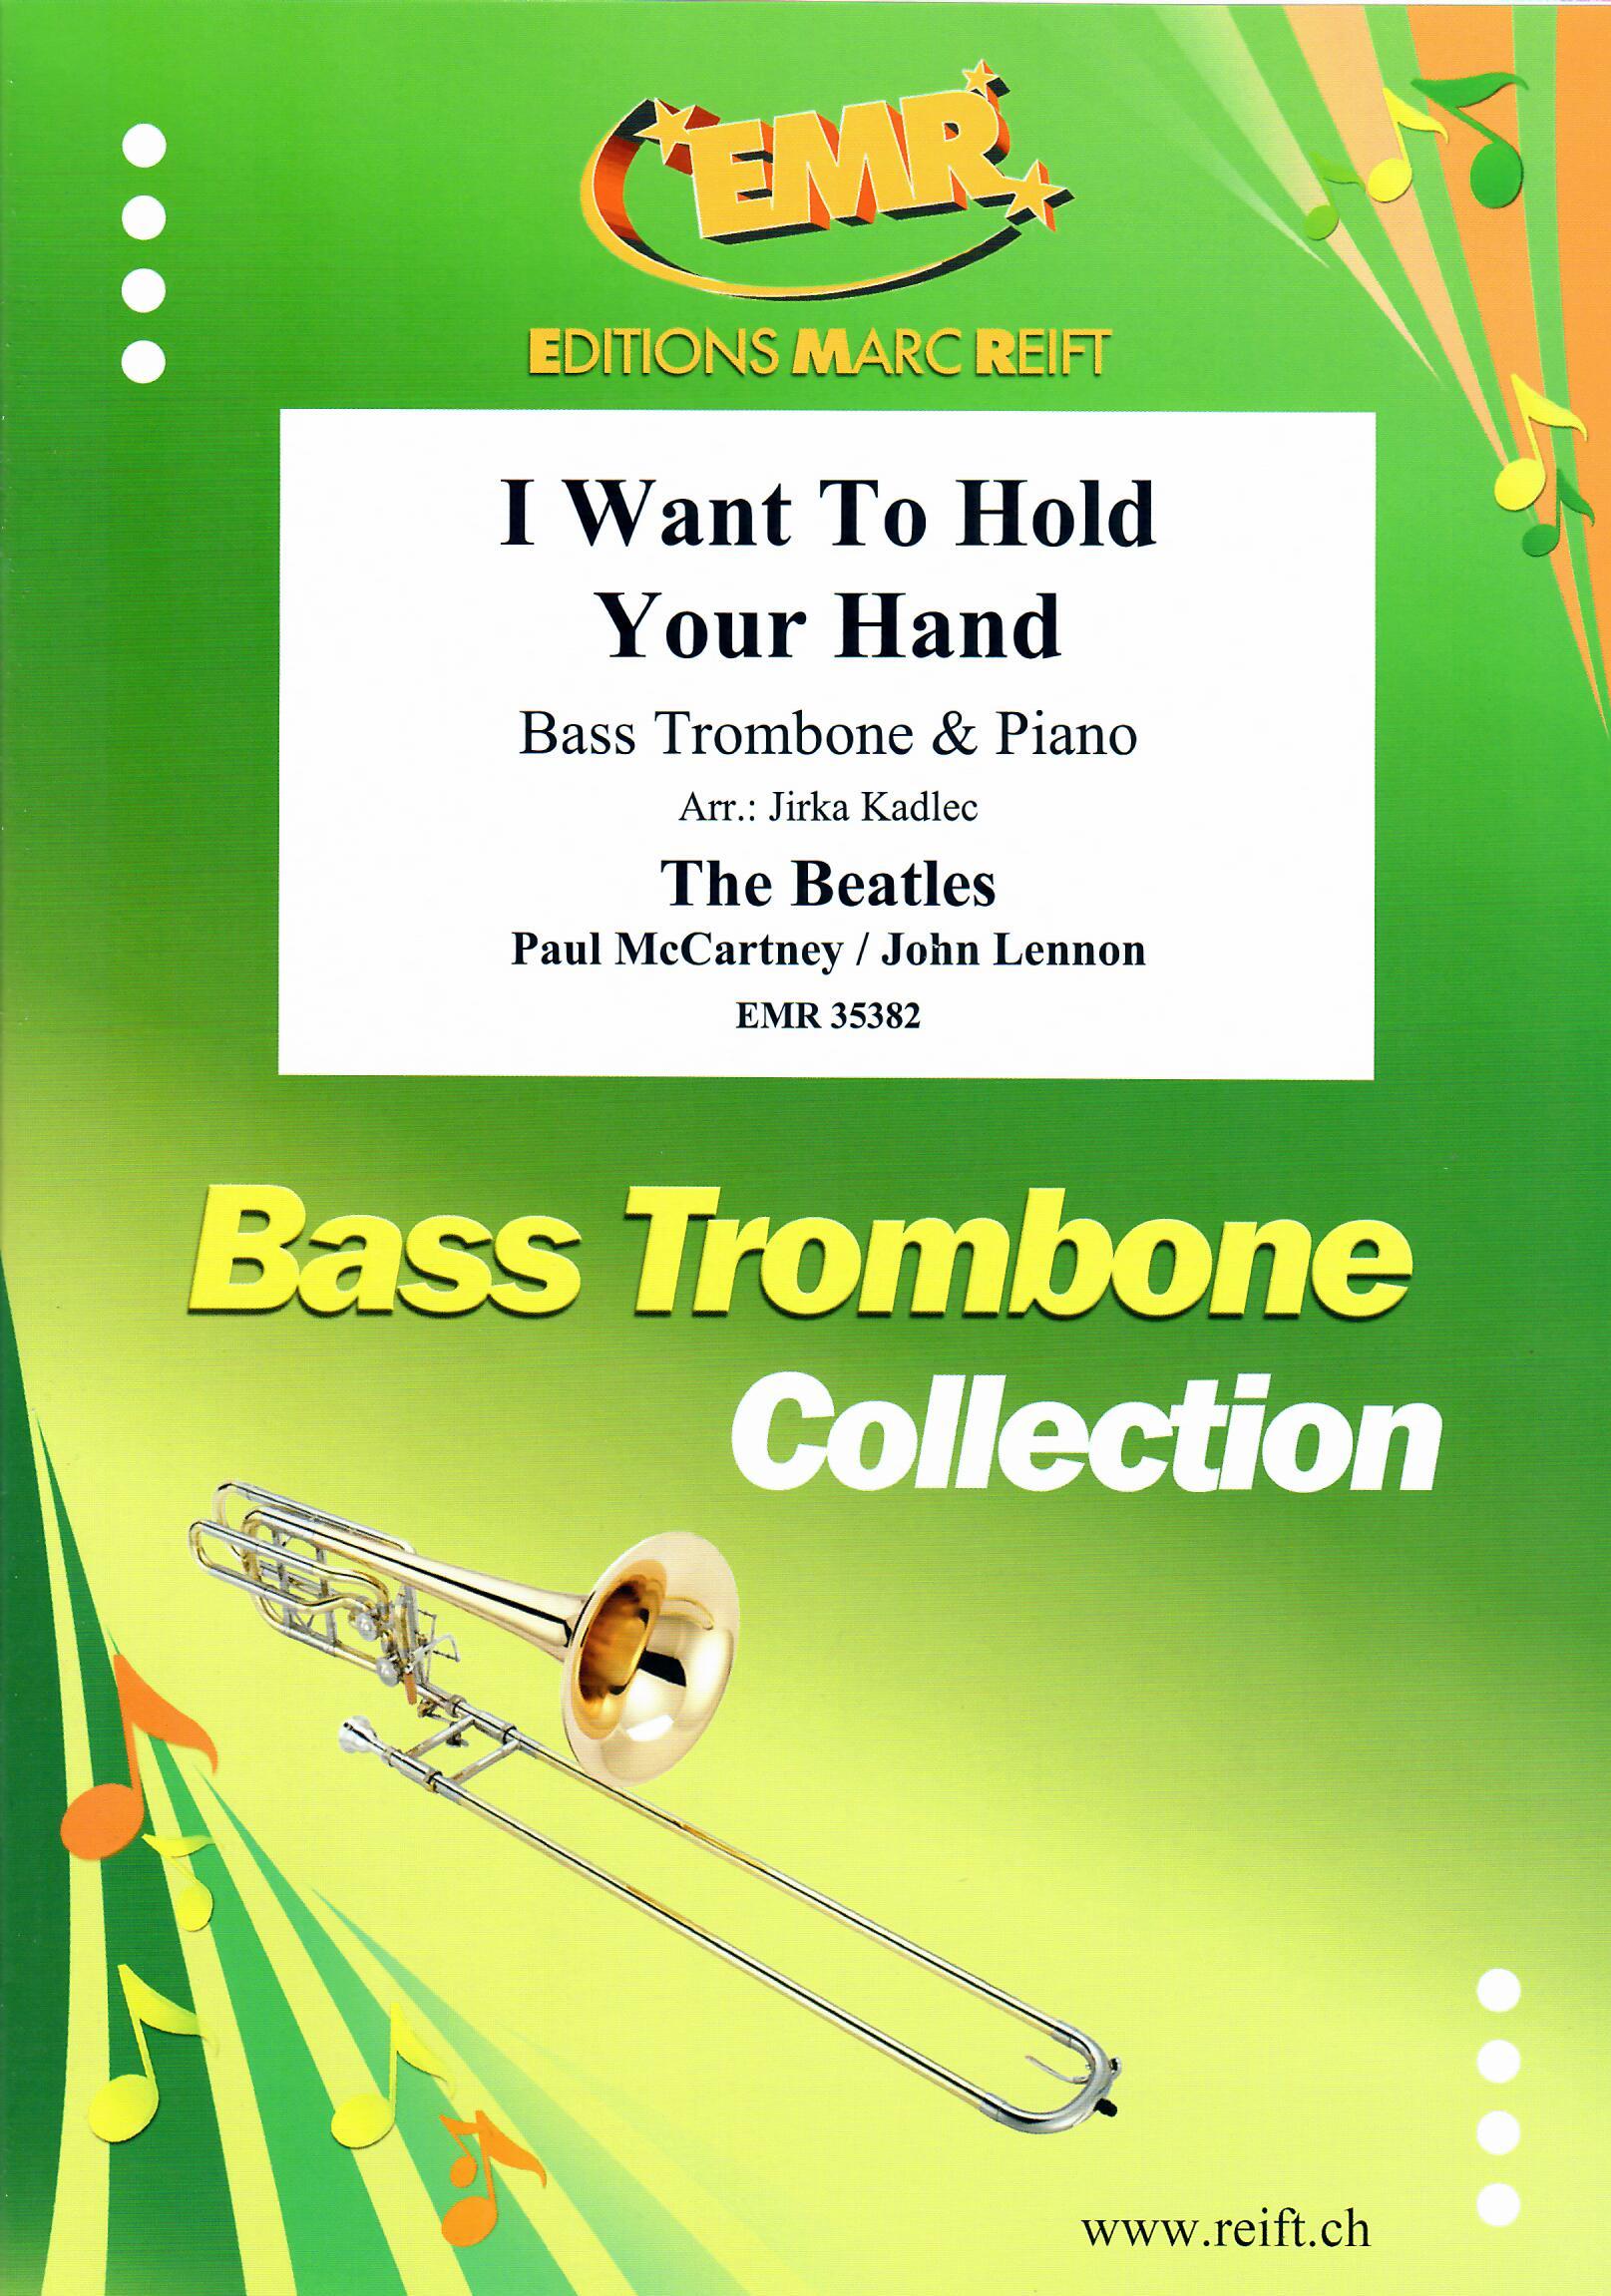 I WANT TO HOLD YOUR HAND, EMR Bass Trombone